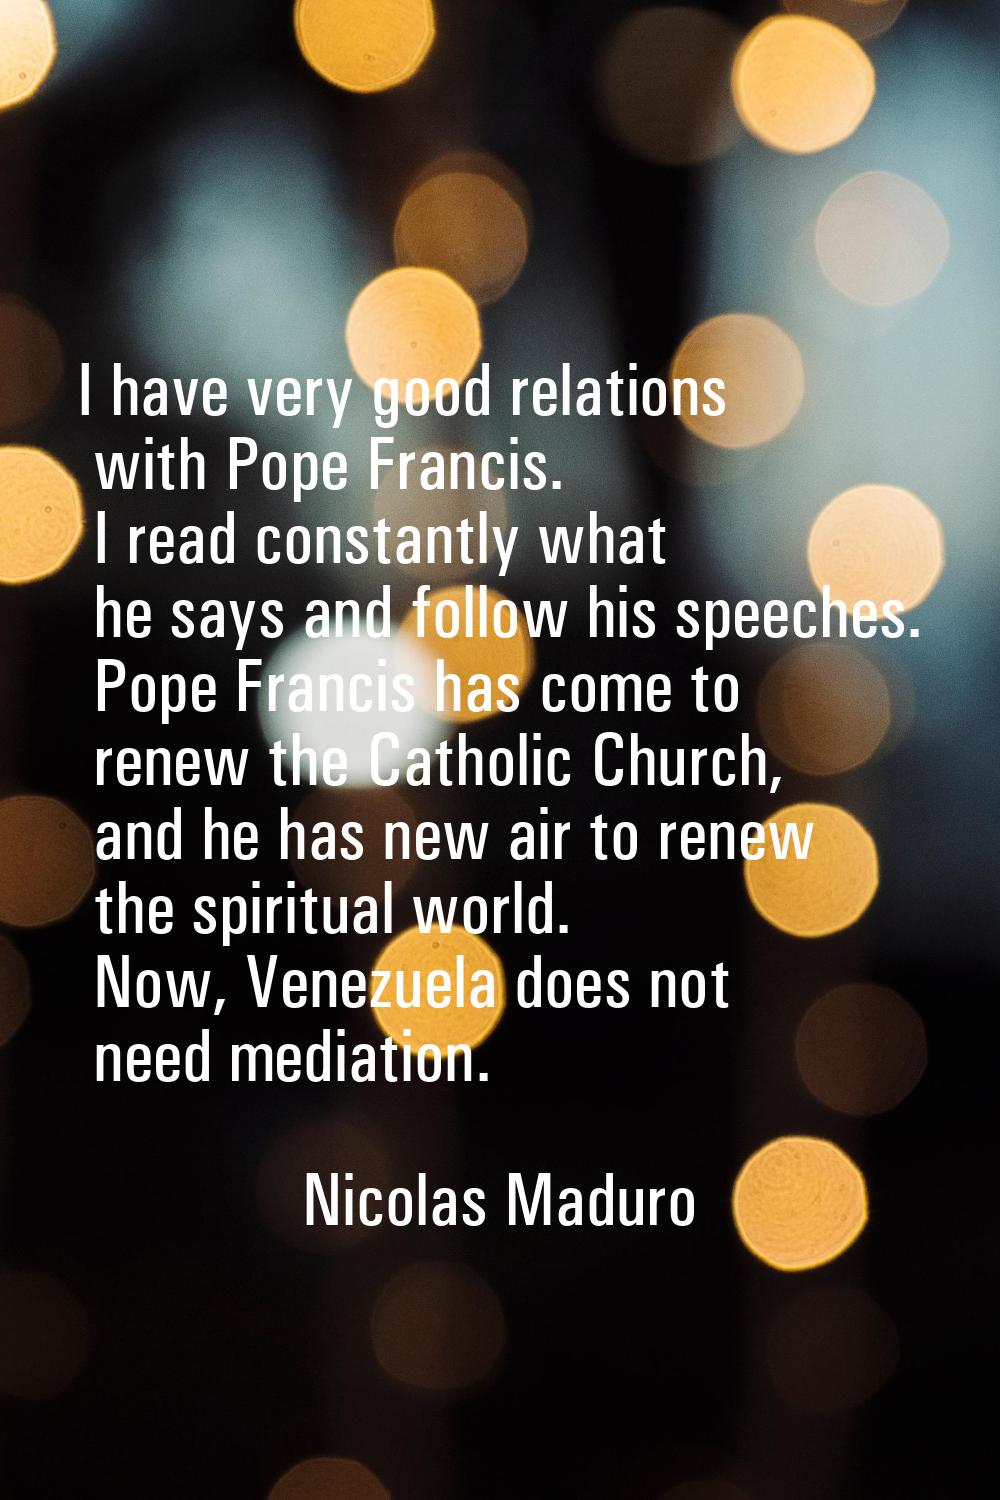 I have very good relations with Pope Francis. I read constantly what he says and follow his speeche